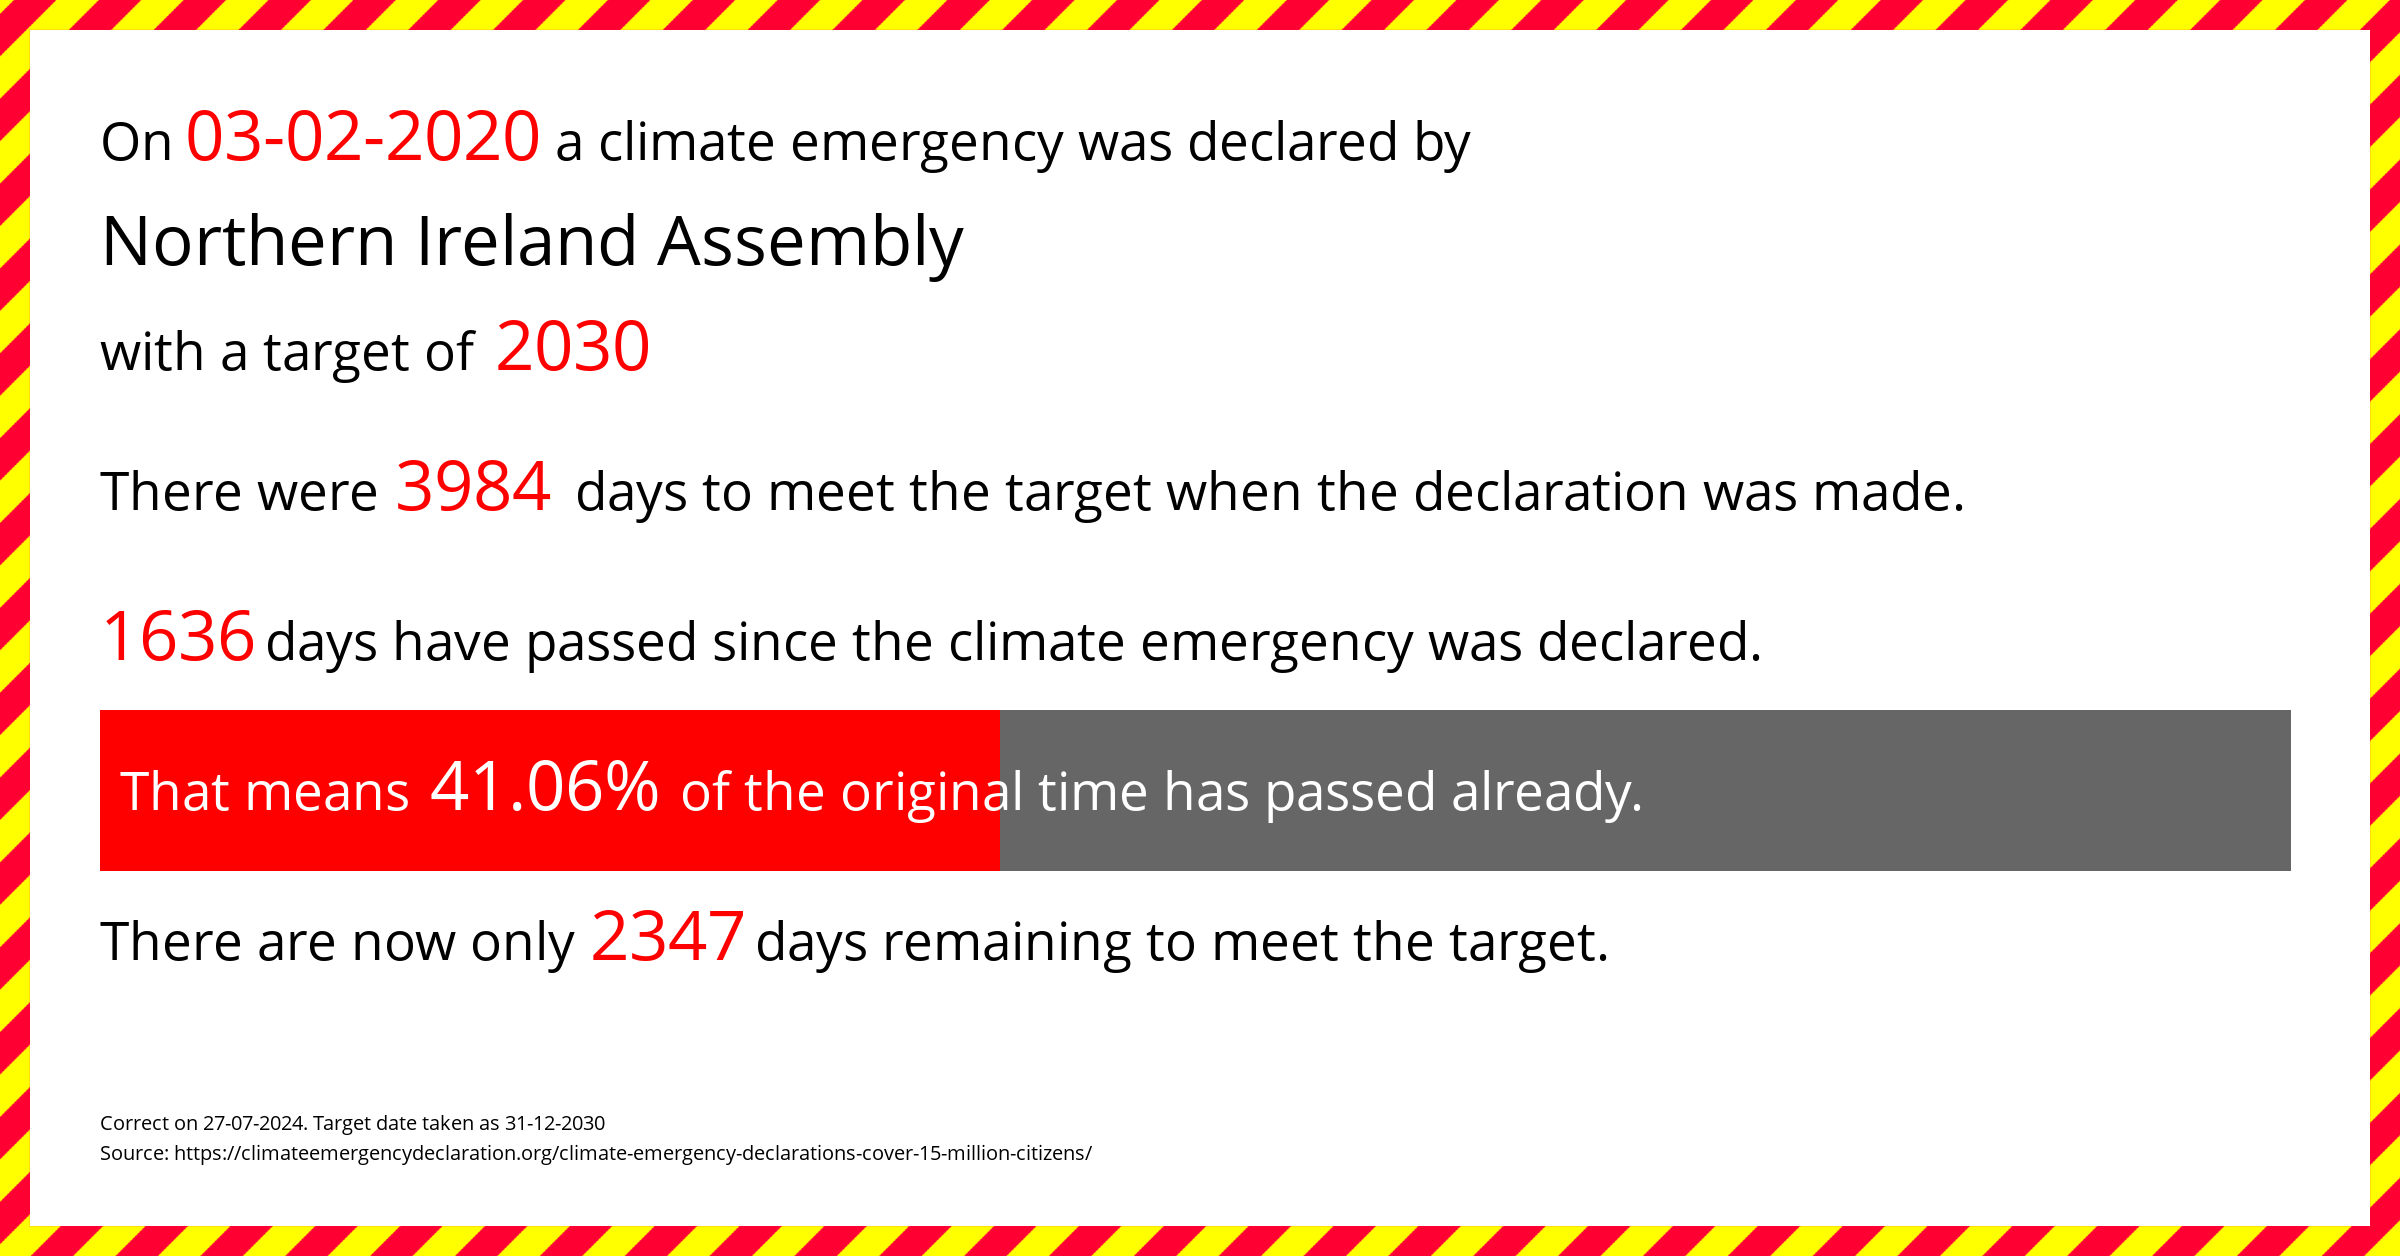 Northern Ireland Assembly declared a Climate emergency on Monday 3rd February 2020, with a target of 2030.